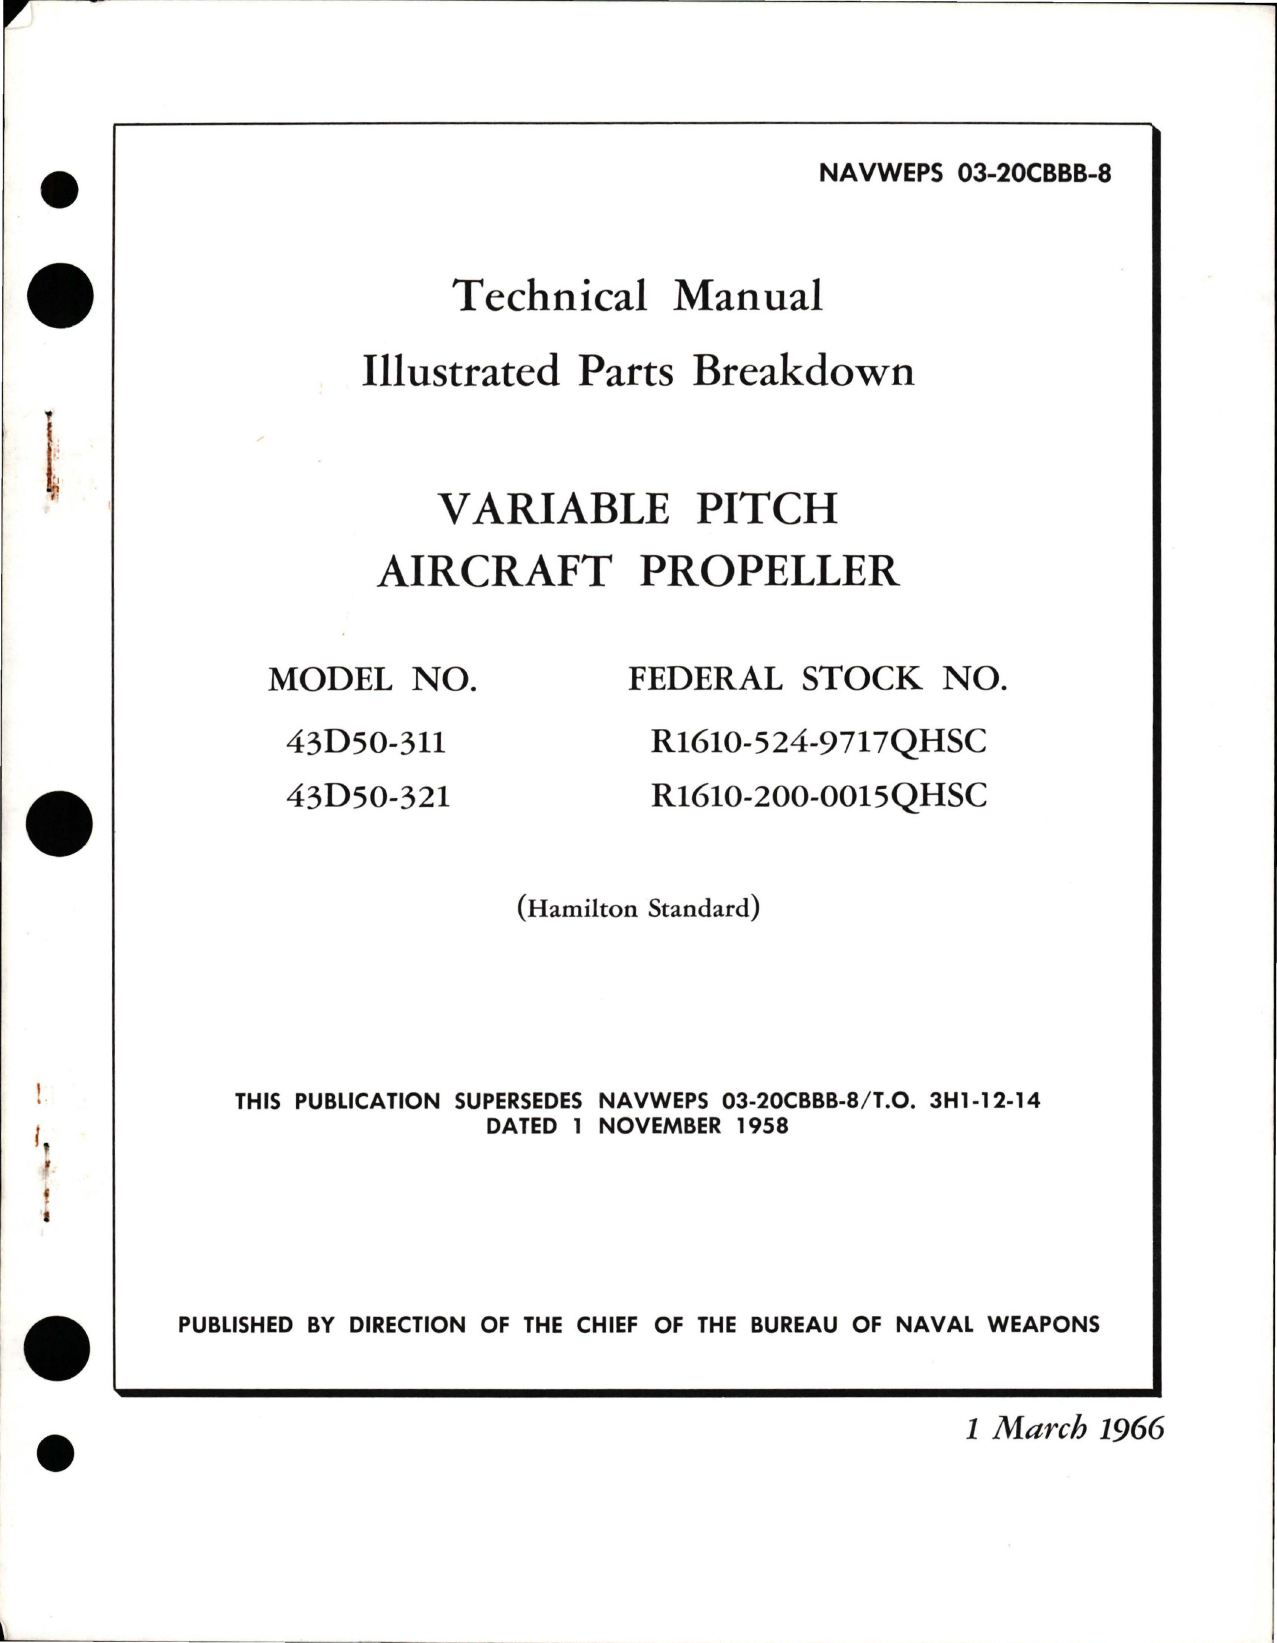 Sample page 1 from AirCorps Library document: Illustrated Parts Breakdown for Variable Pitch Aircraft Propeller - Models 43D50-311 and 43D50-321